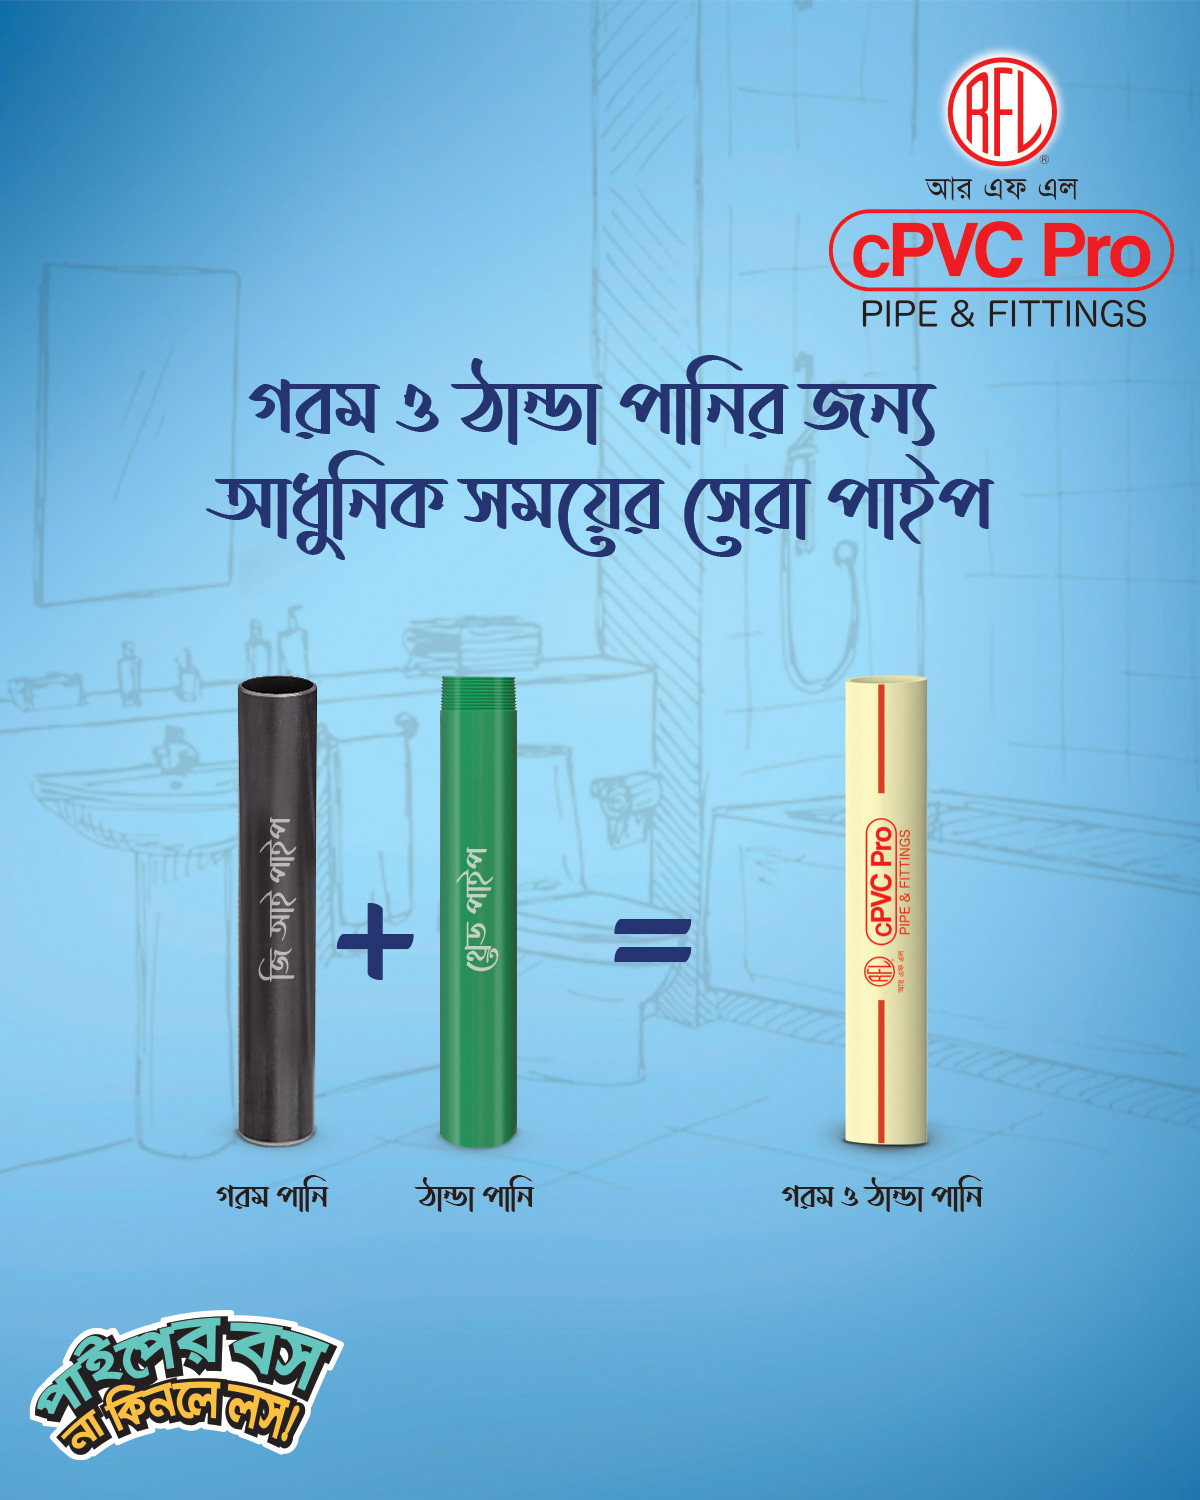 Advertising  Bangladesh hot and cold India Layout Pipe fittings pvc Social media post upvc water